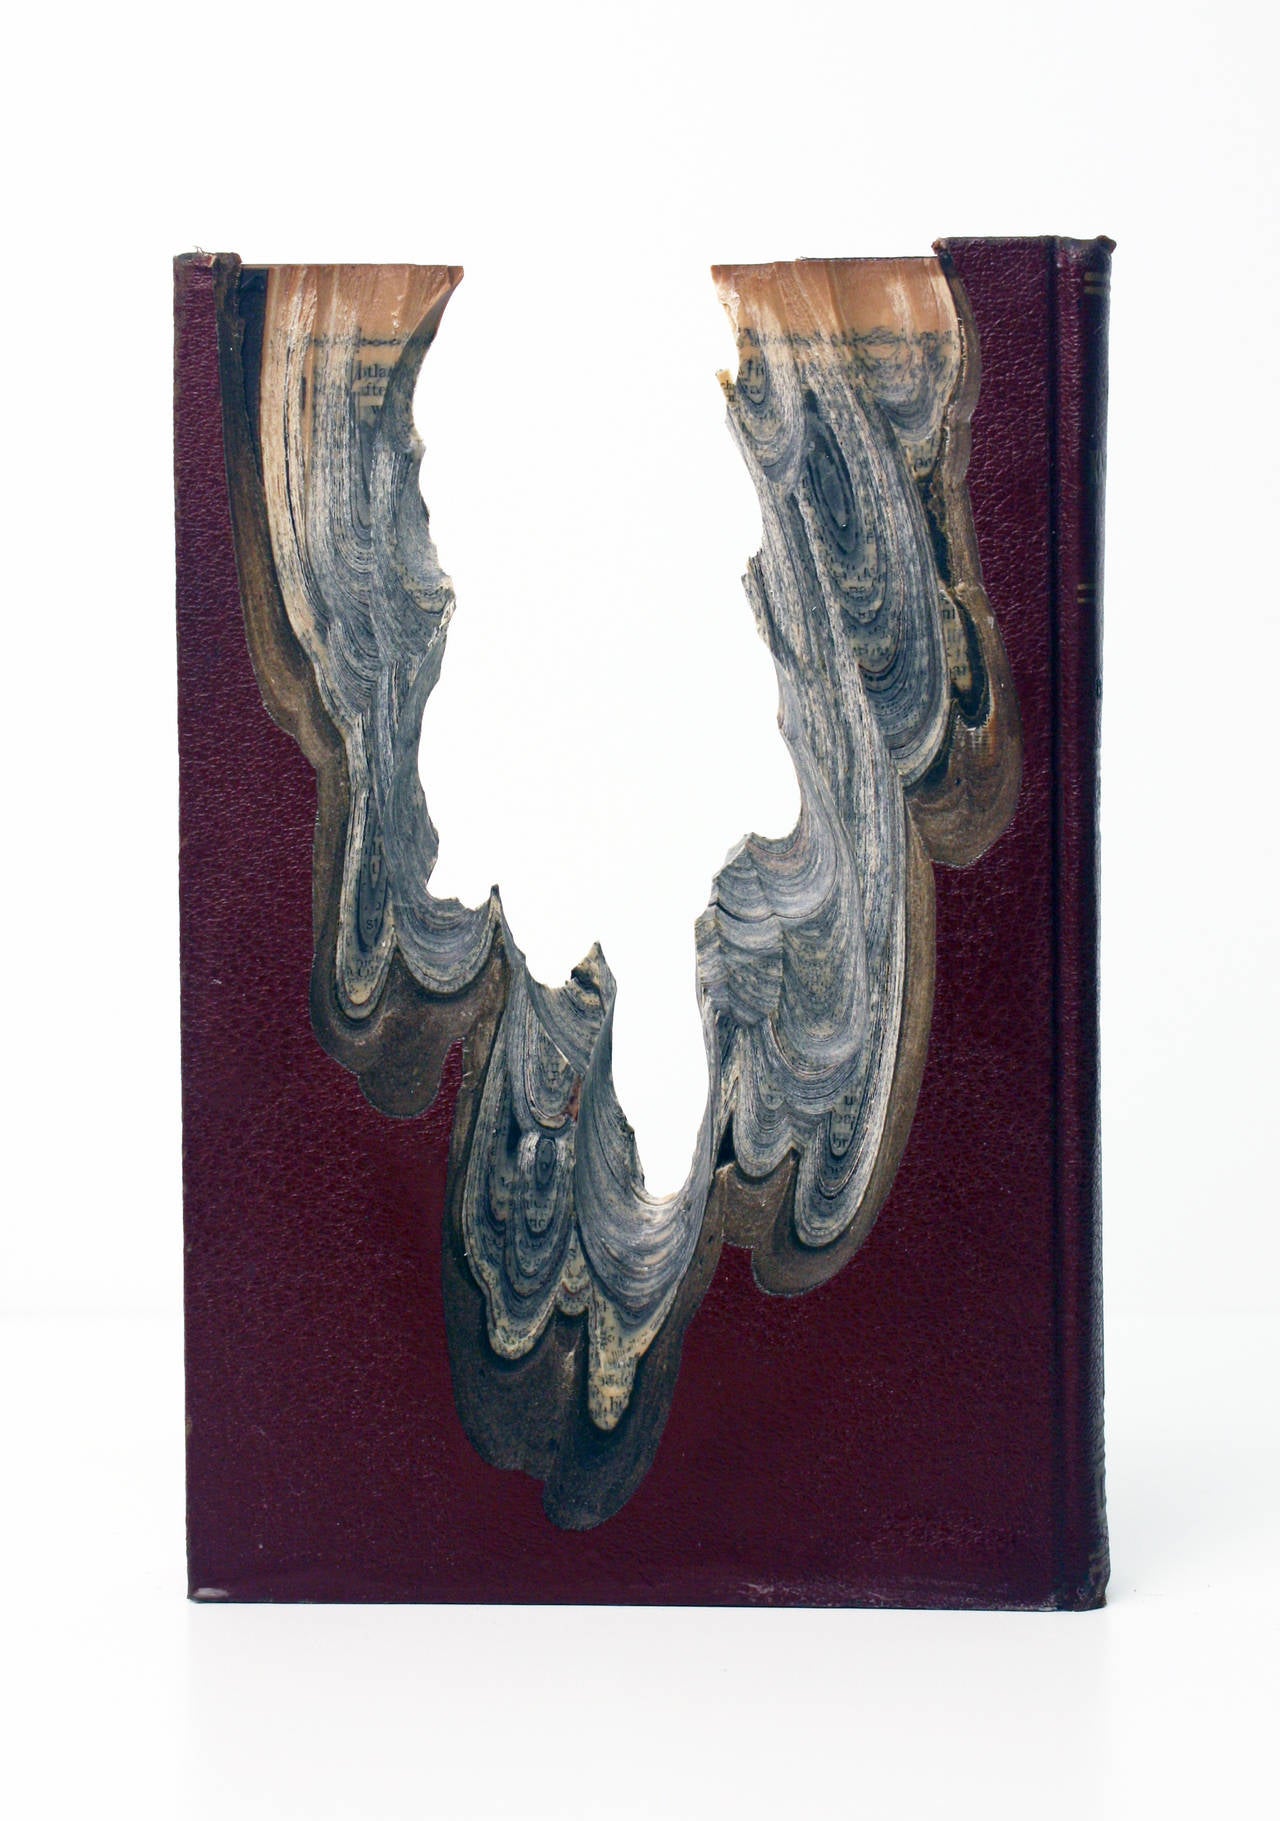 Carving: Book of Knowledge 4 - Sculpture by Jessica Drenk